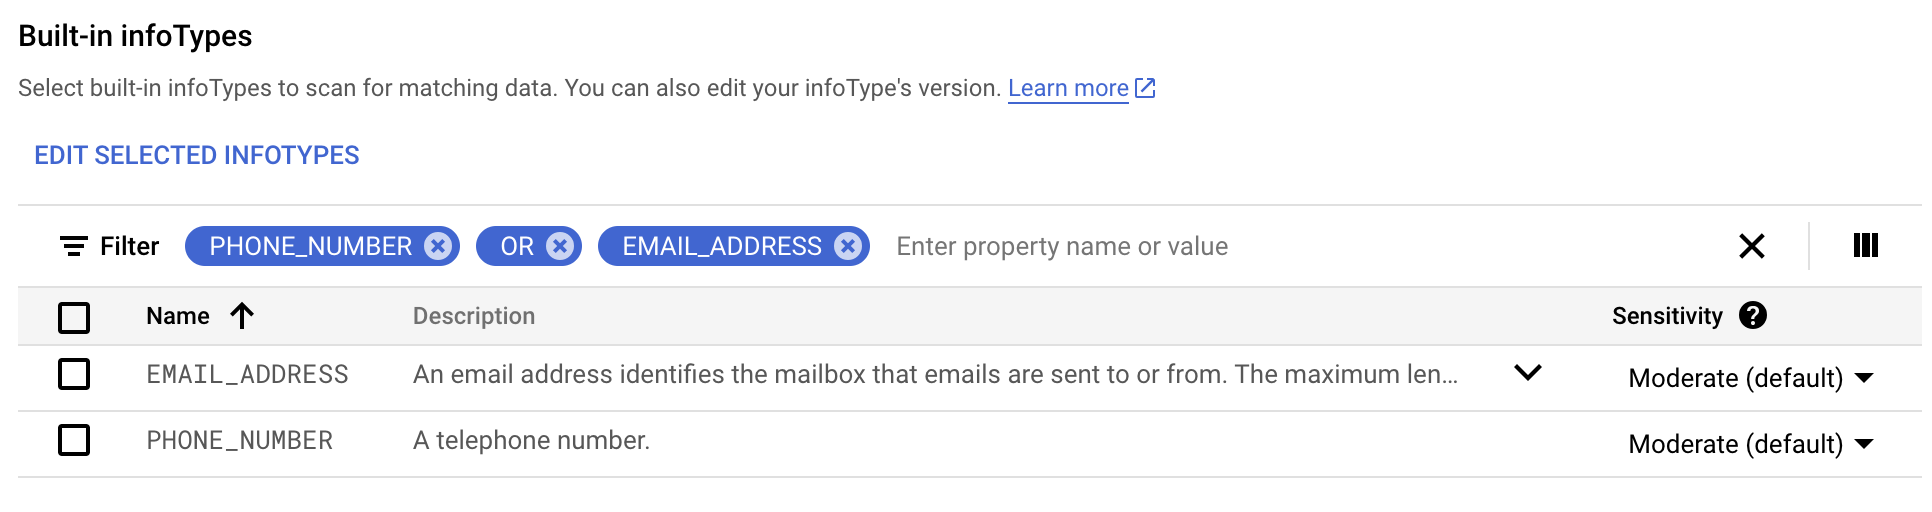 Built-in phone number or email filter